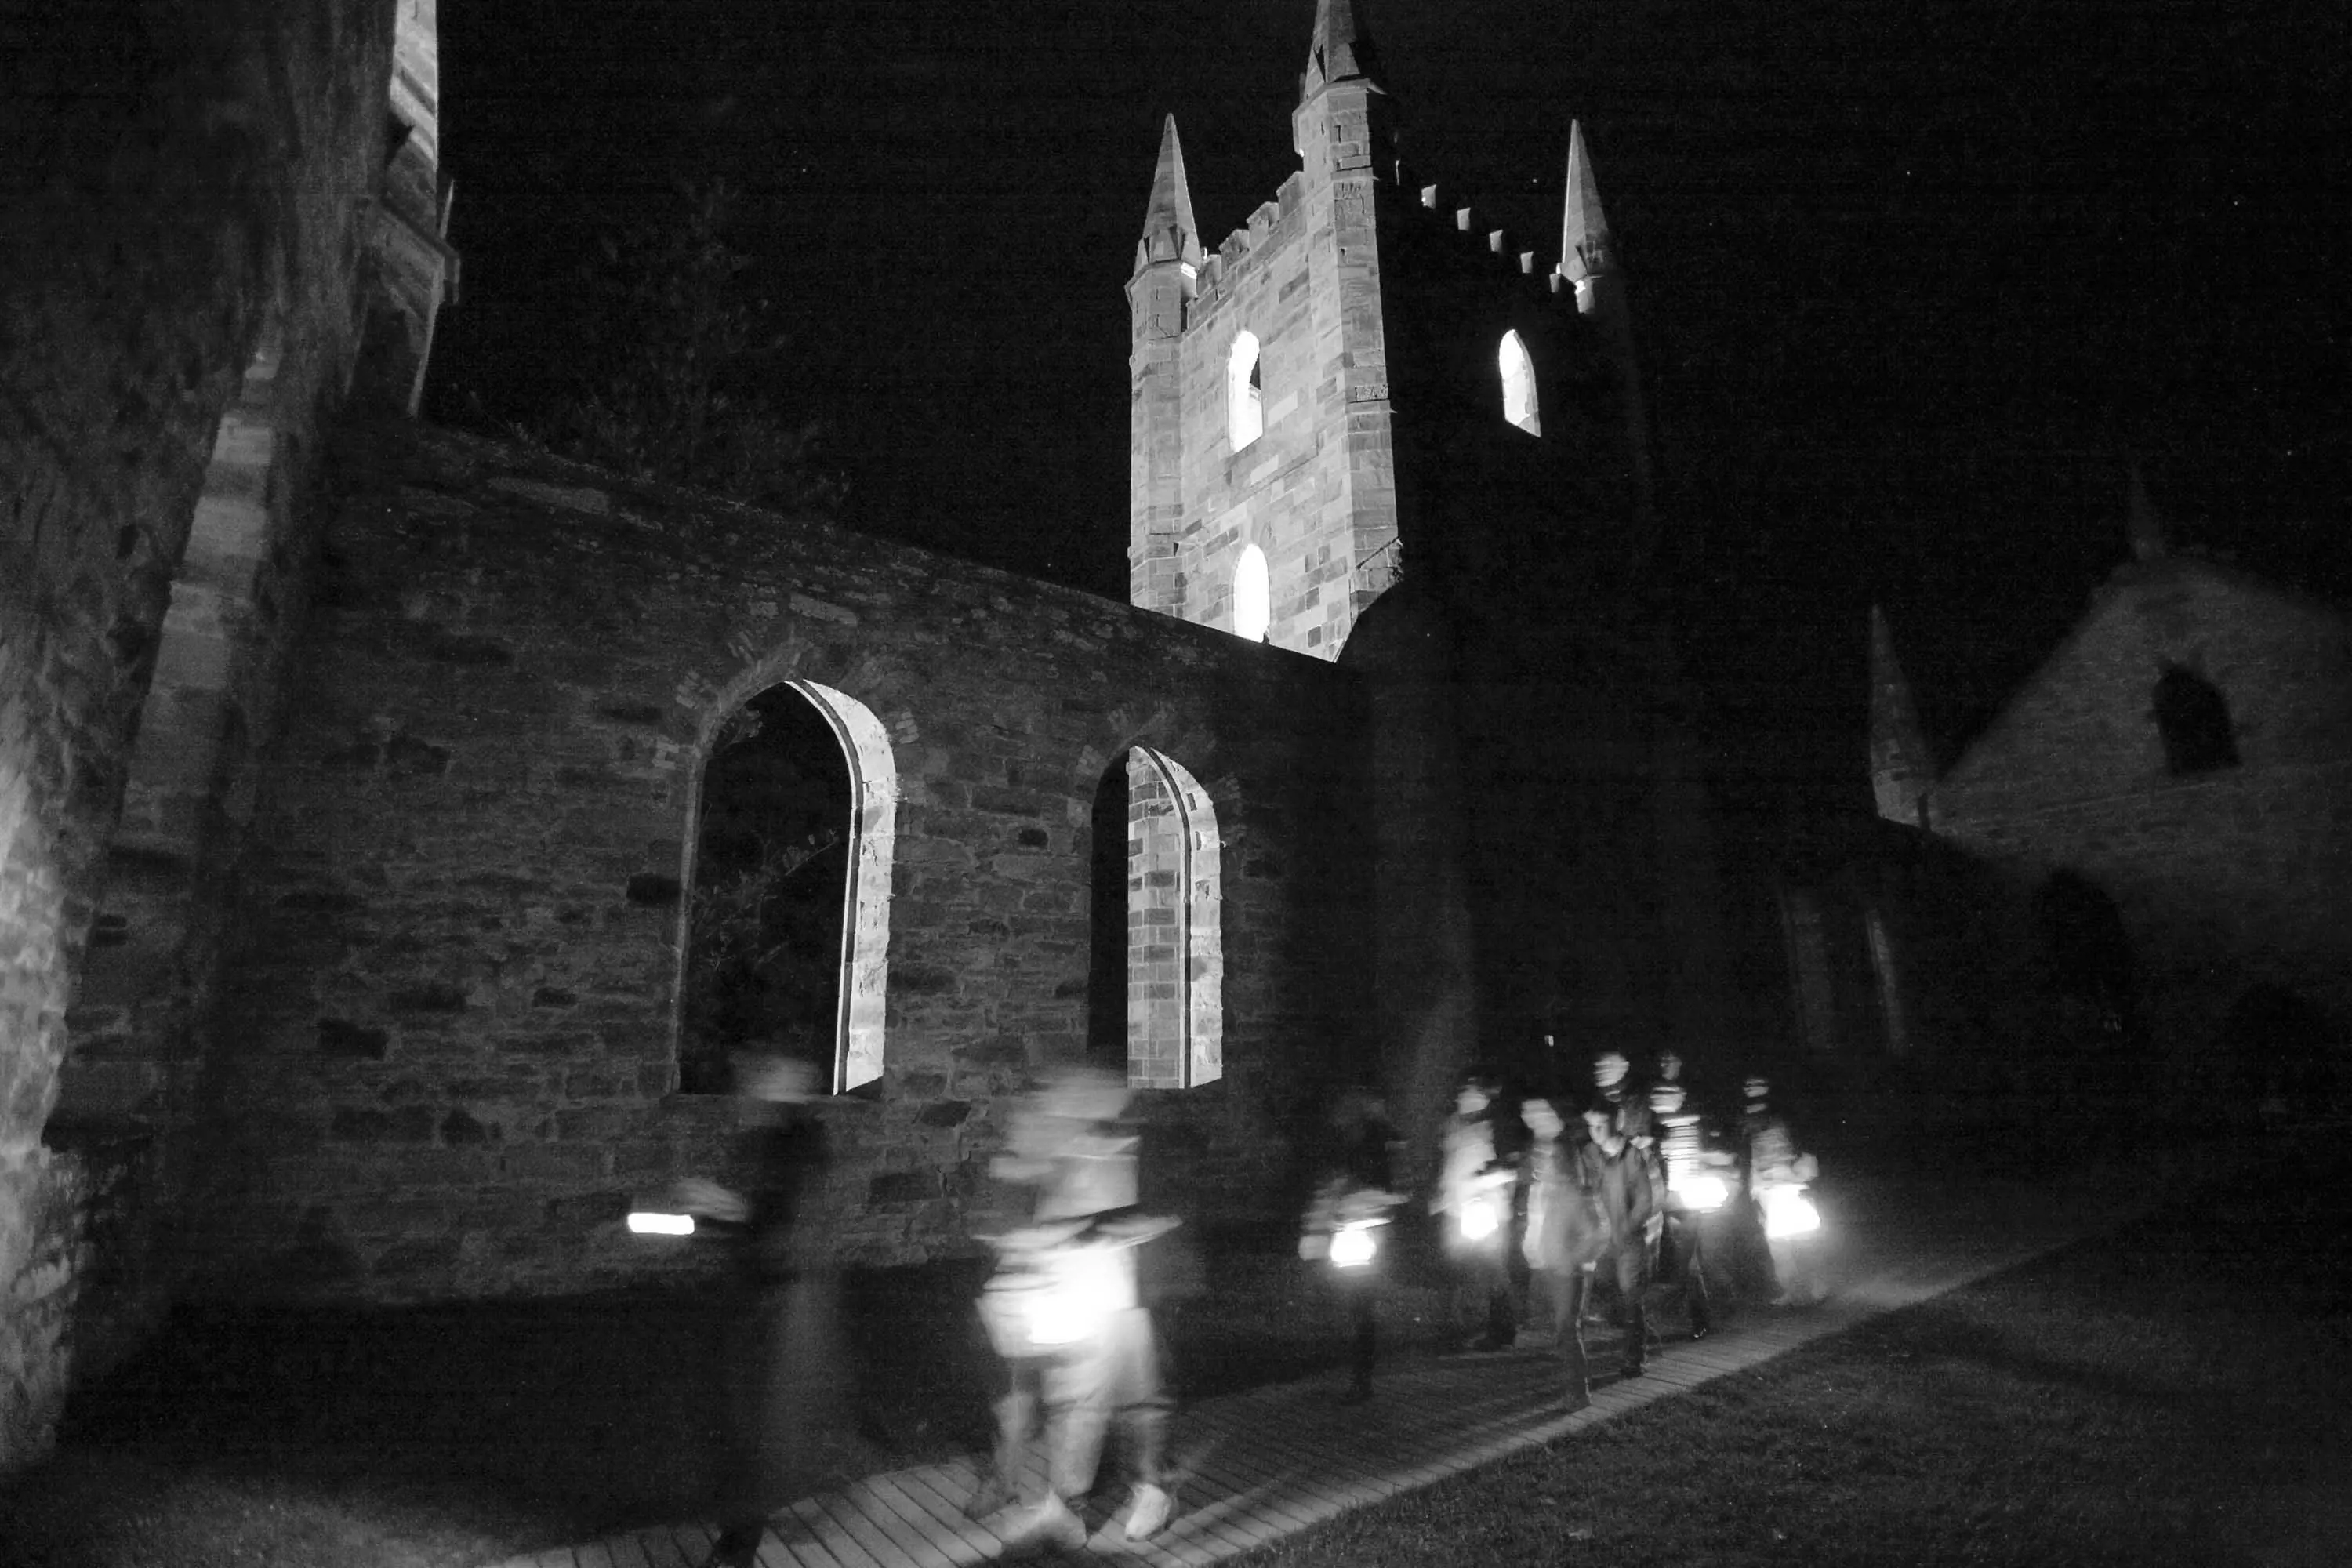 A tour group holding torches walks along a path in front of a colonial era church spire made from sandstone is illuminated by lights from below.